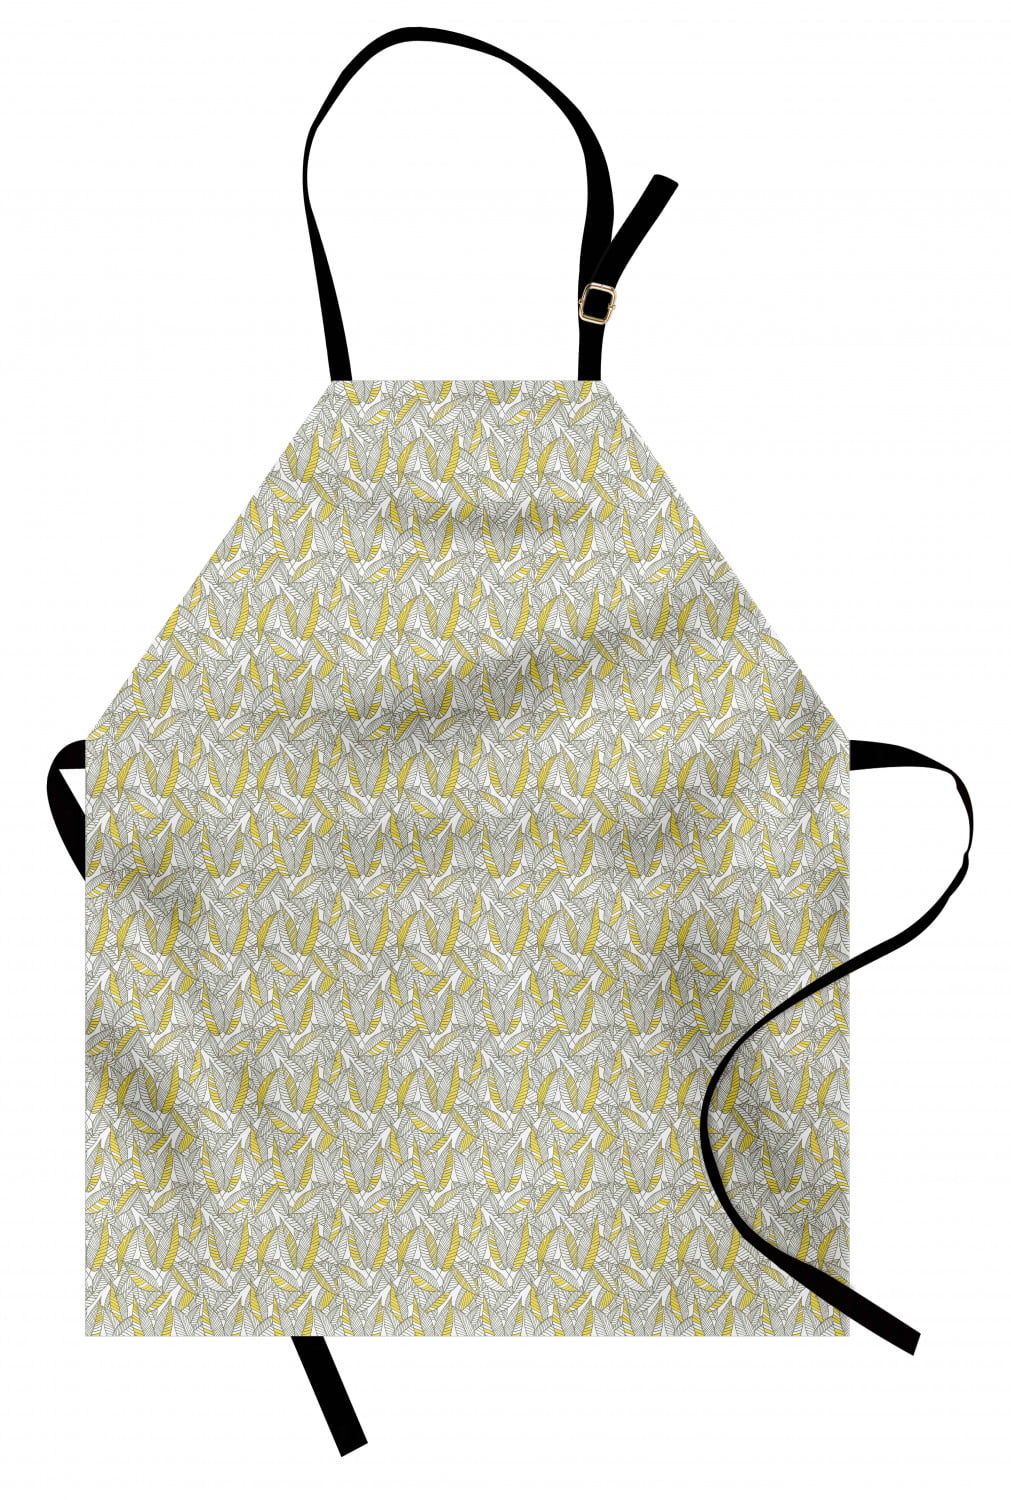 Details about   Ambesonne Geometric Apron Unisex Kitchen Bib with Adjustable Neck Cooking Baking 